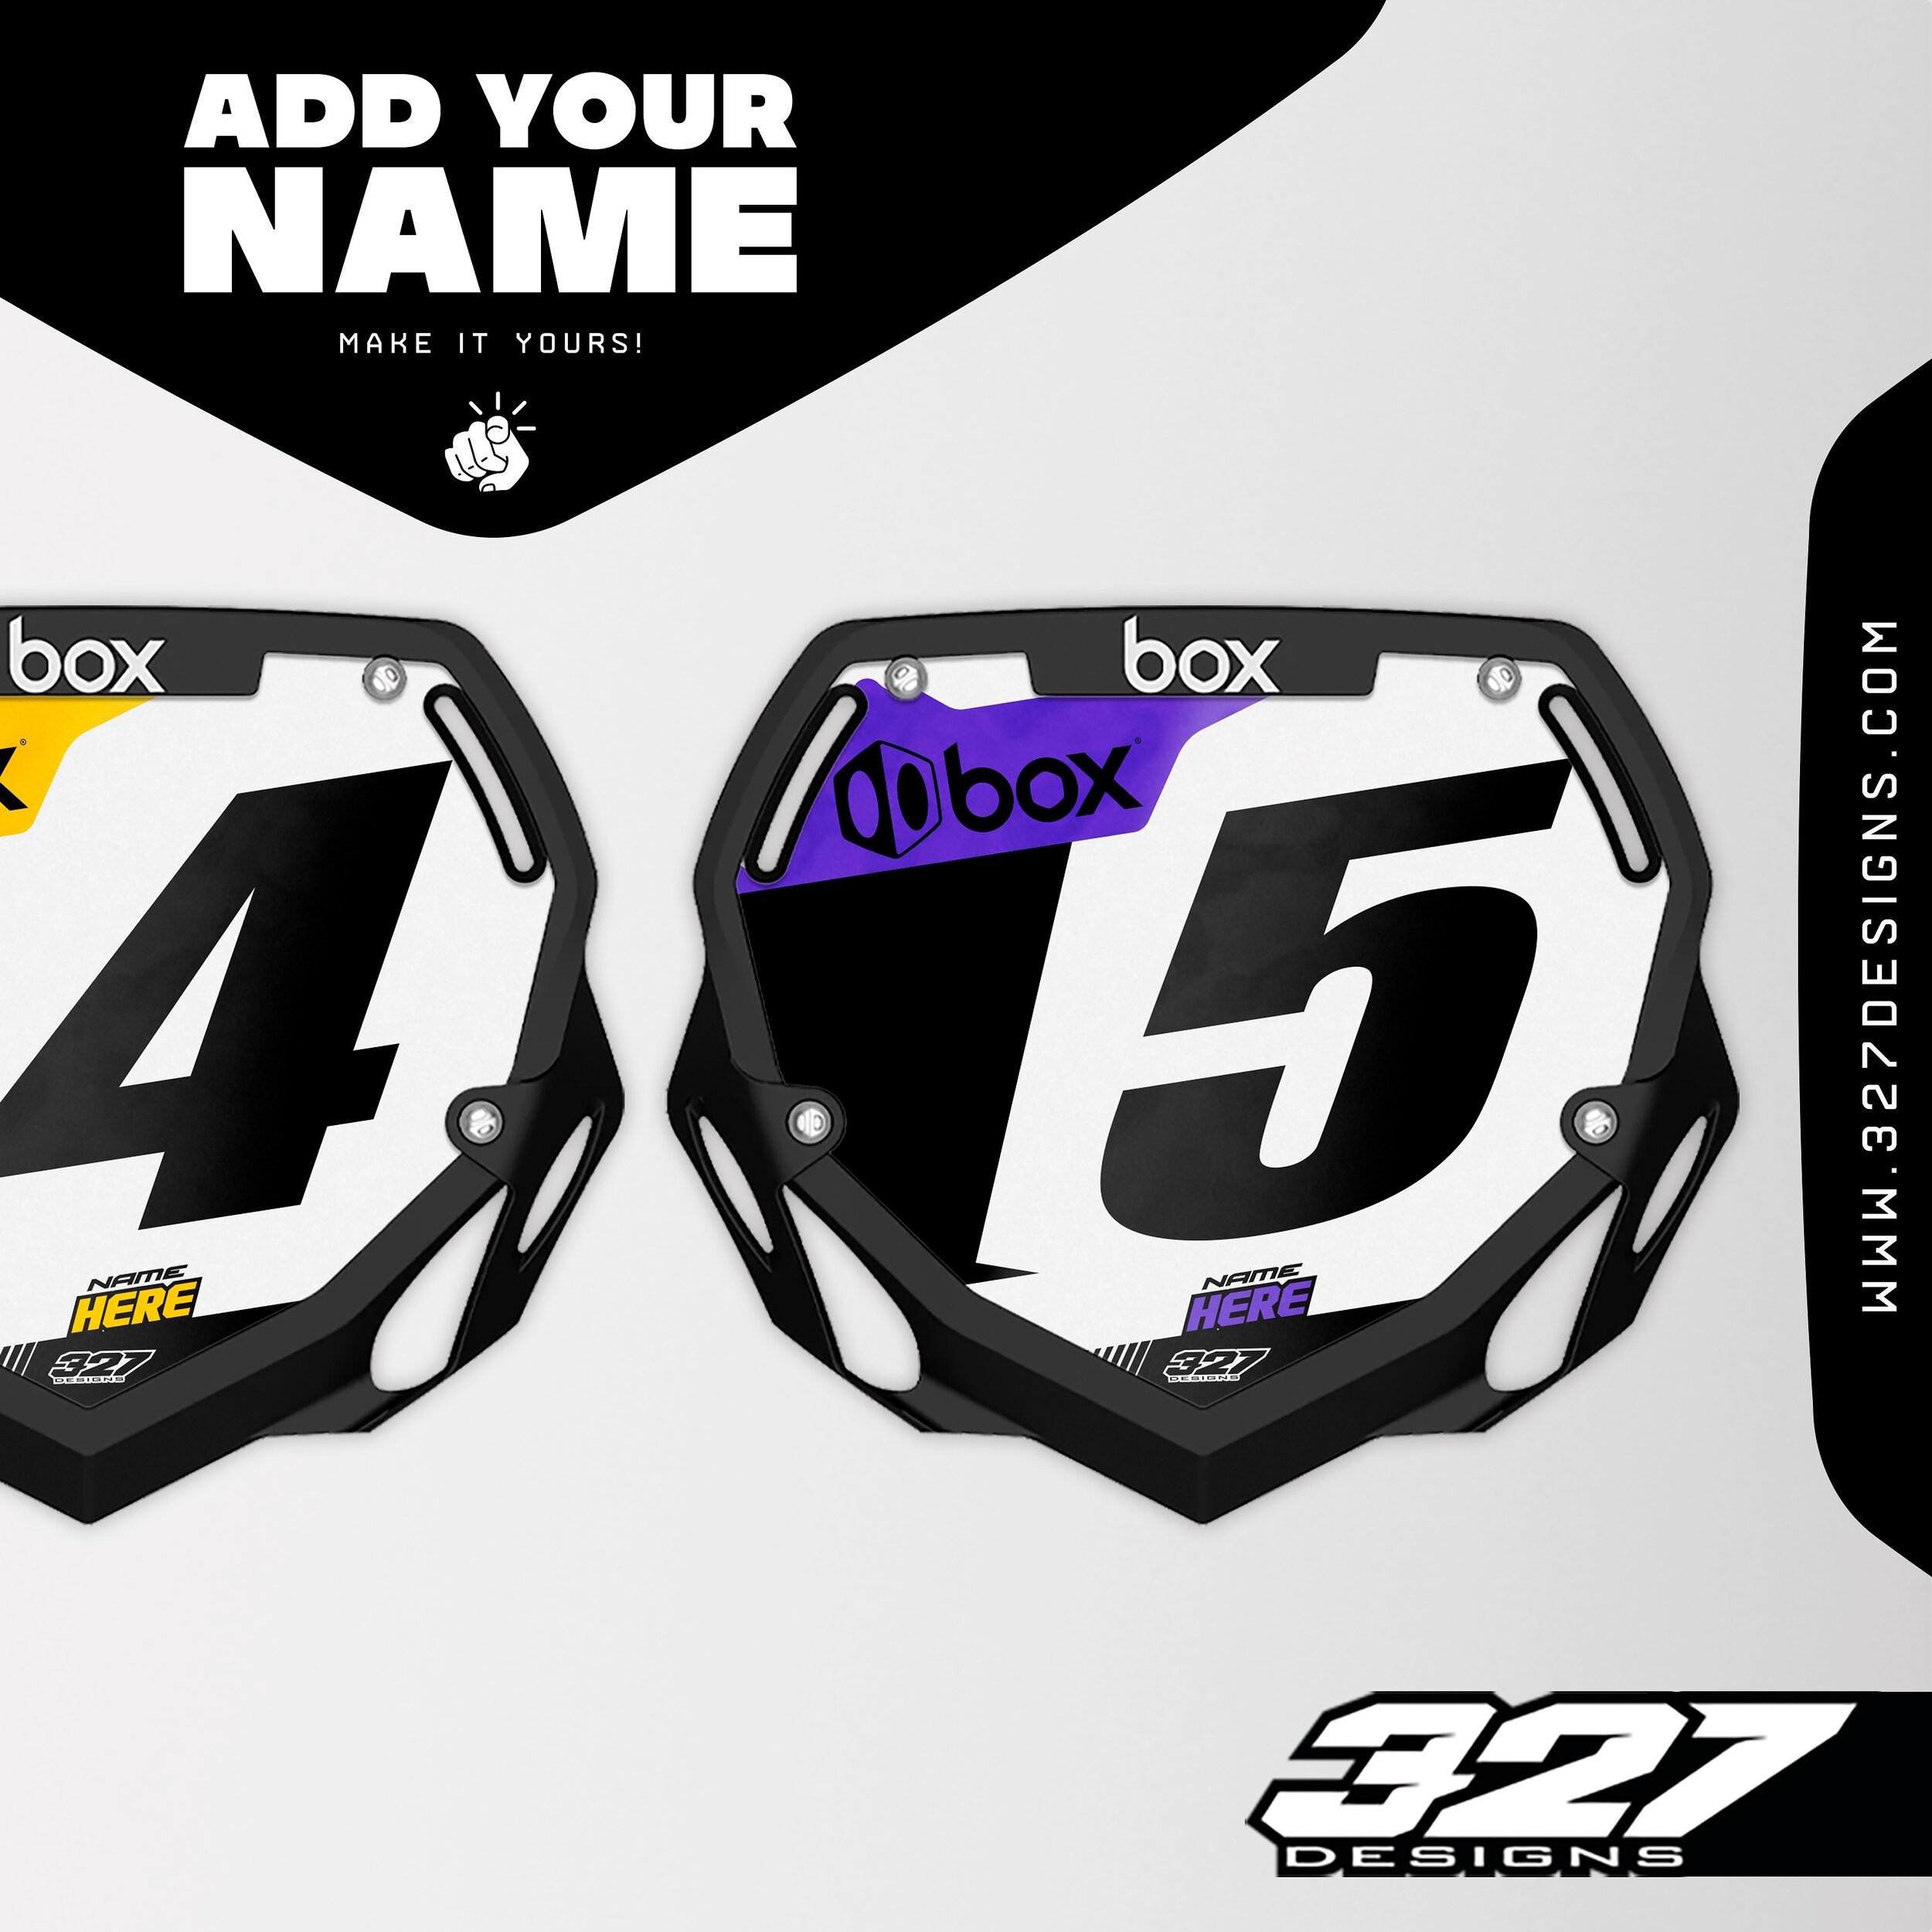 Official Partner with @boxbmx and the #boxlevelupprogram, we offer fully customized number plate inserts to match your jersey!  #327army

Available on our website 🖥️ 327Designs.com
*Access Code via Team FB page*

&mdash;

#bmx #bmxracing #vinyl #usa